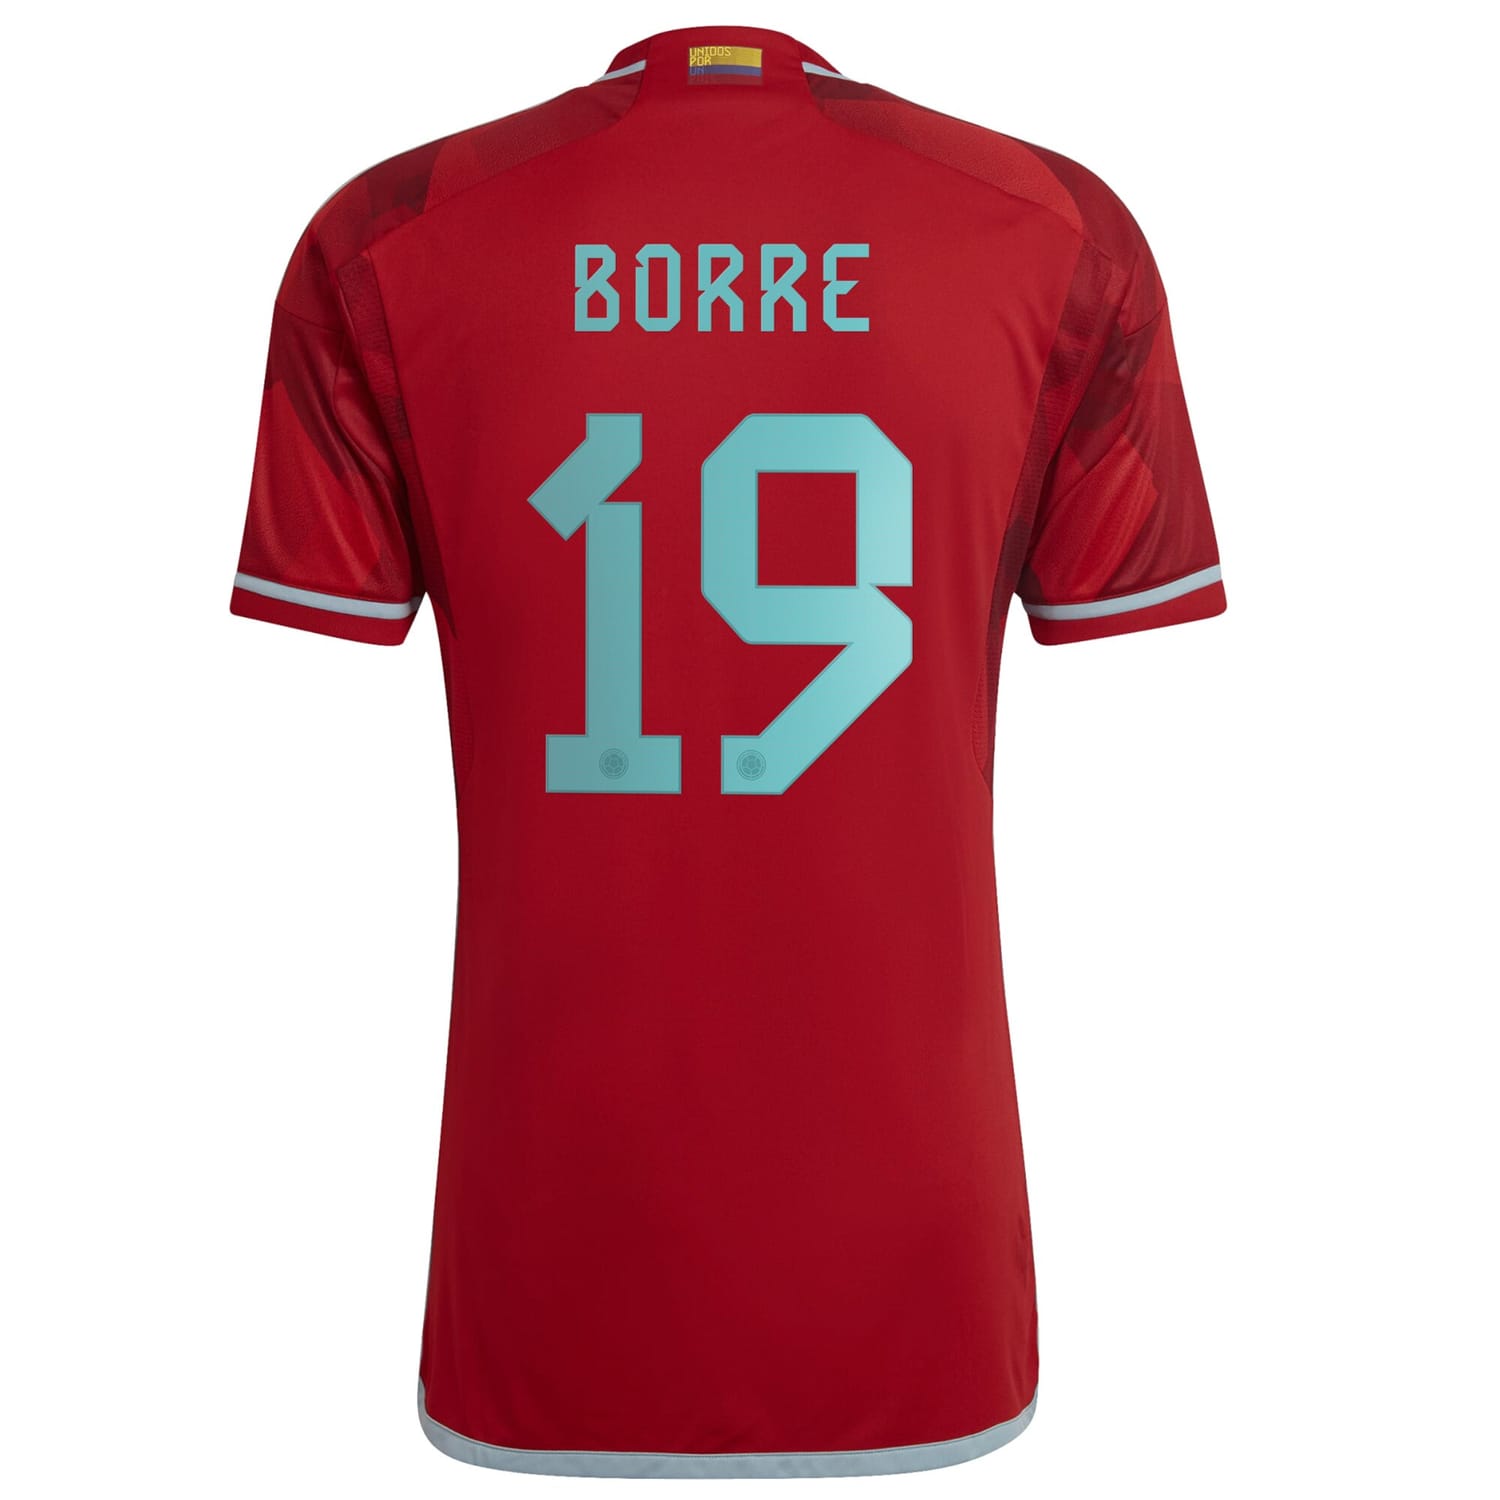 Colombia National Team Away Jersey Shirt Red 2022-23 player Rafael Borré printing for Men